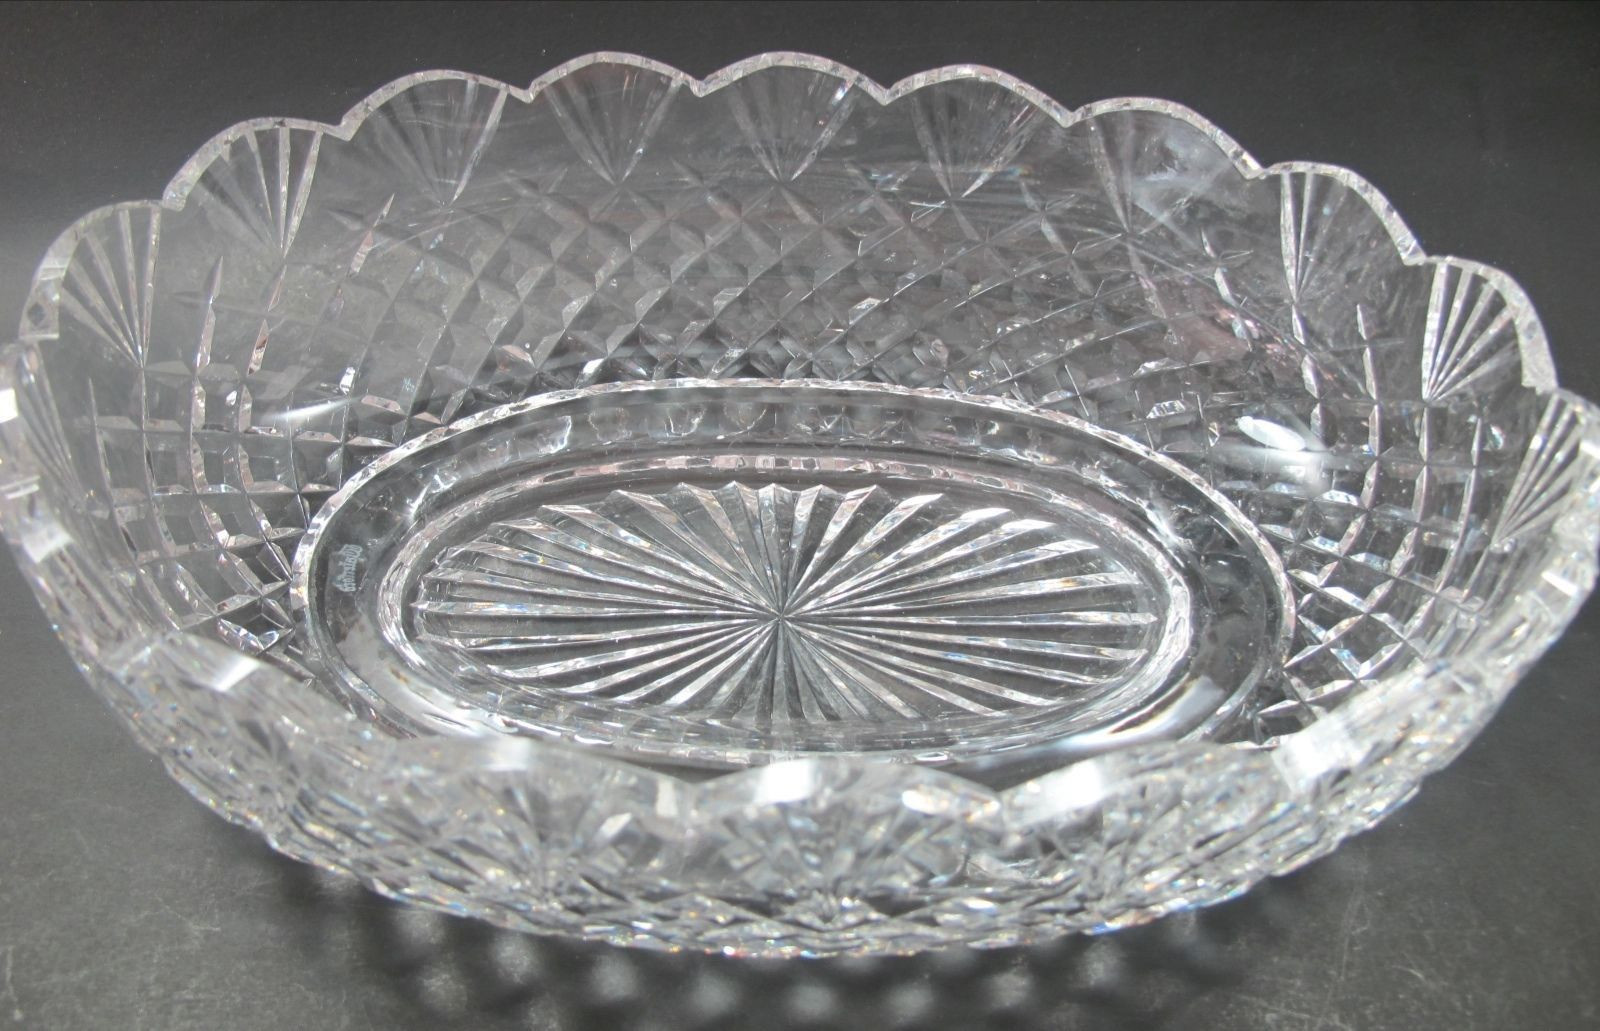 waterford cut crystal vase of signed waterford cut glass oval shape bowl hand cut in ireland 11 regarding signed waterford cut glass oval shape bowl hand cut in ireland 11 long 3 5 high 7 5 wide and weighs 4 75 lbs in like mint condition no chips cracks or